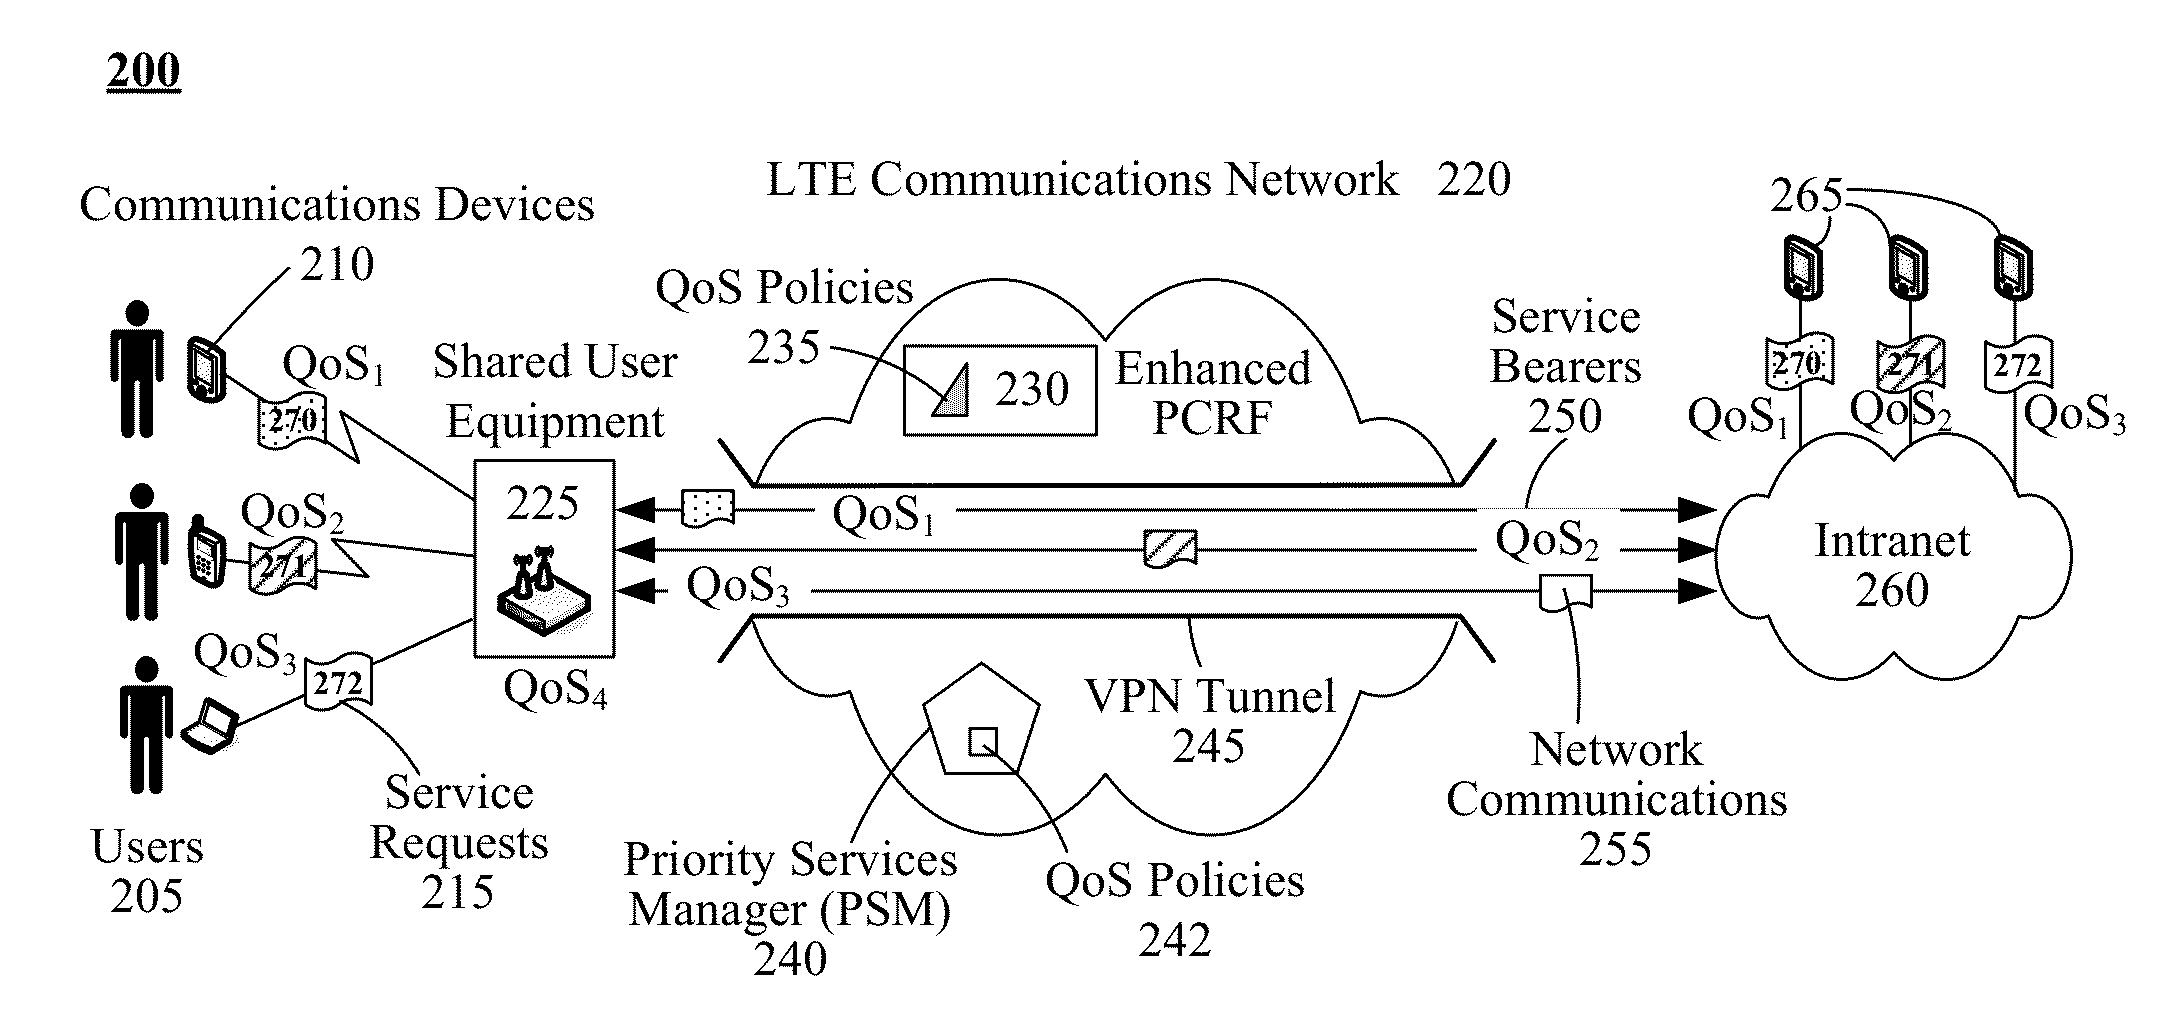 Preserving user-differentiated quality of service for mobile virtual private network communications made using a shared connection point